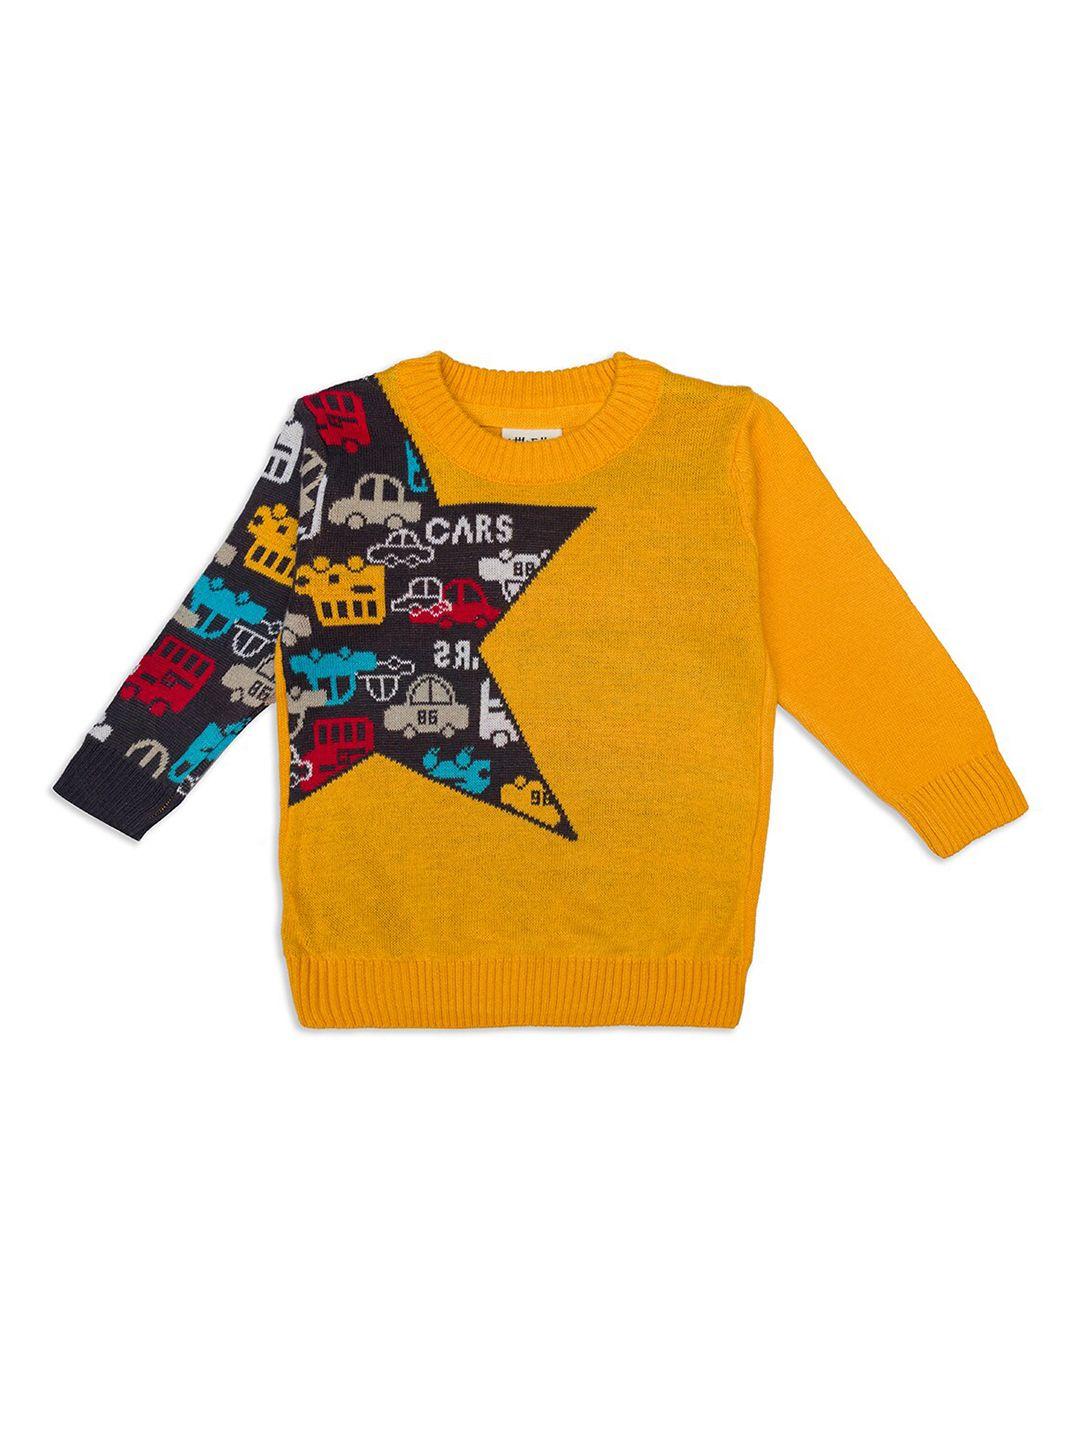 little folks unisex kids yellow & black typography printed pullover